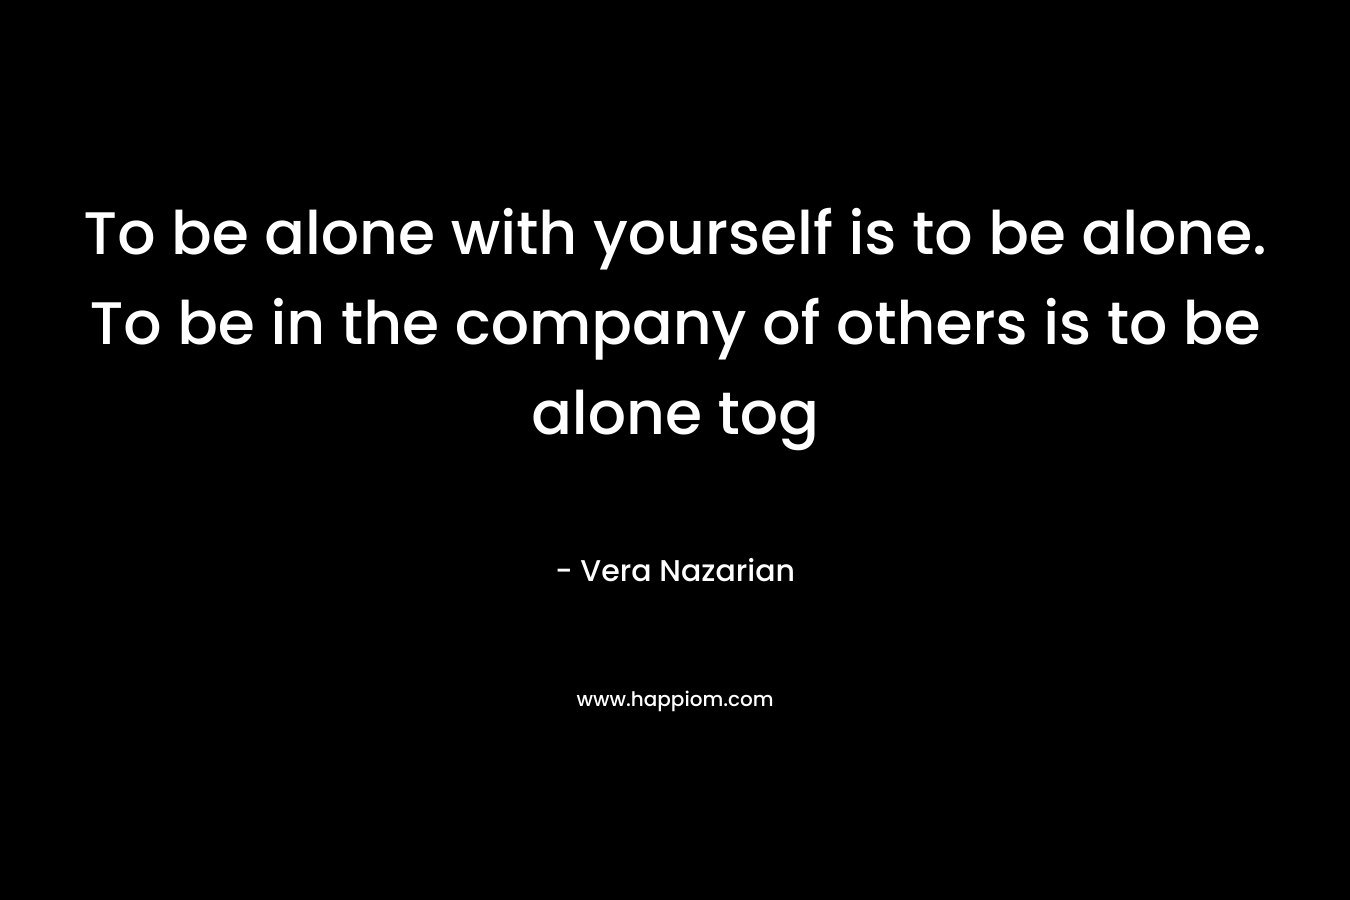 To be alone with yourself is to be alone. To be in the company of others is to be alone tog